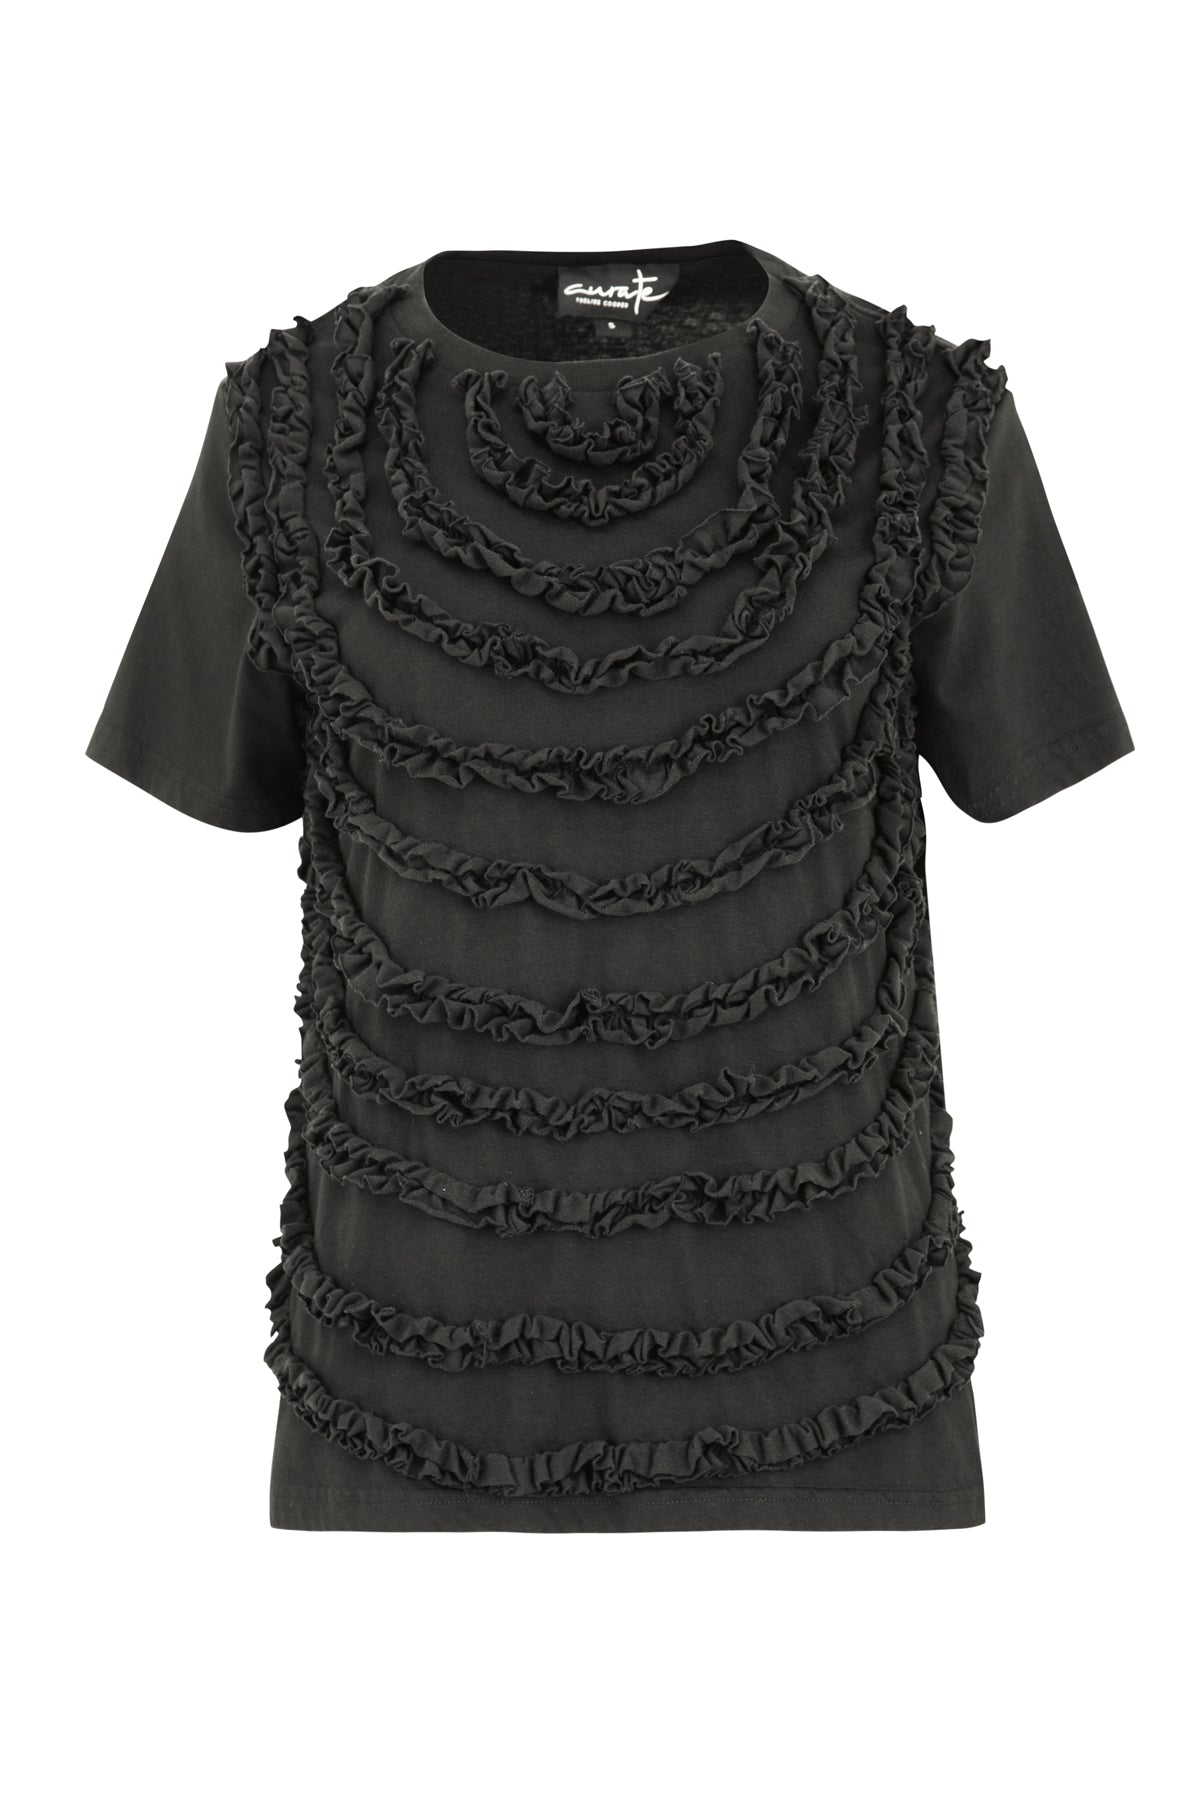 Curate - Ruffle it Up Top - Black